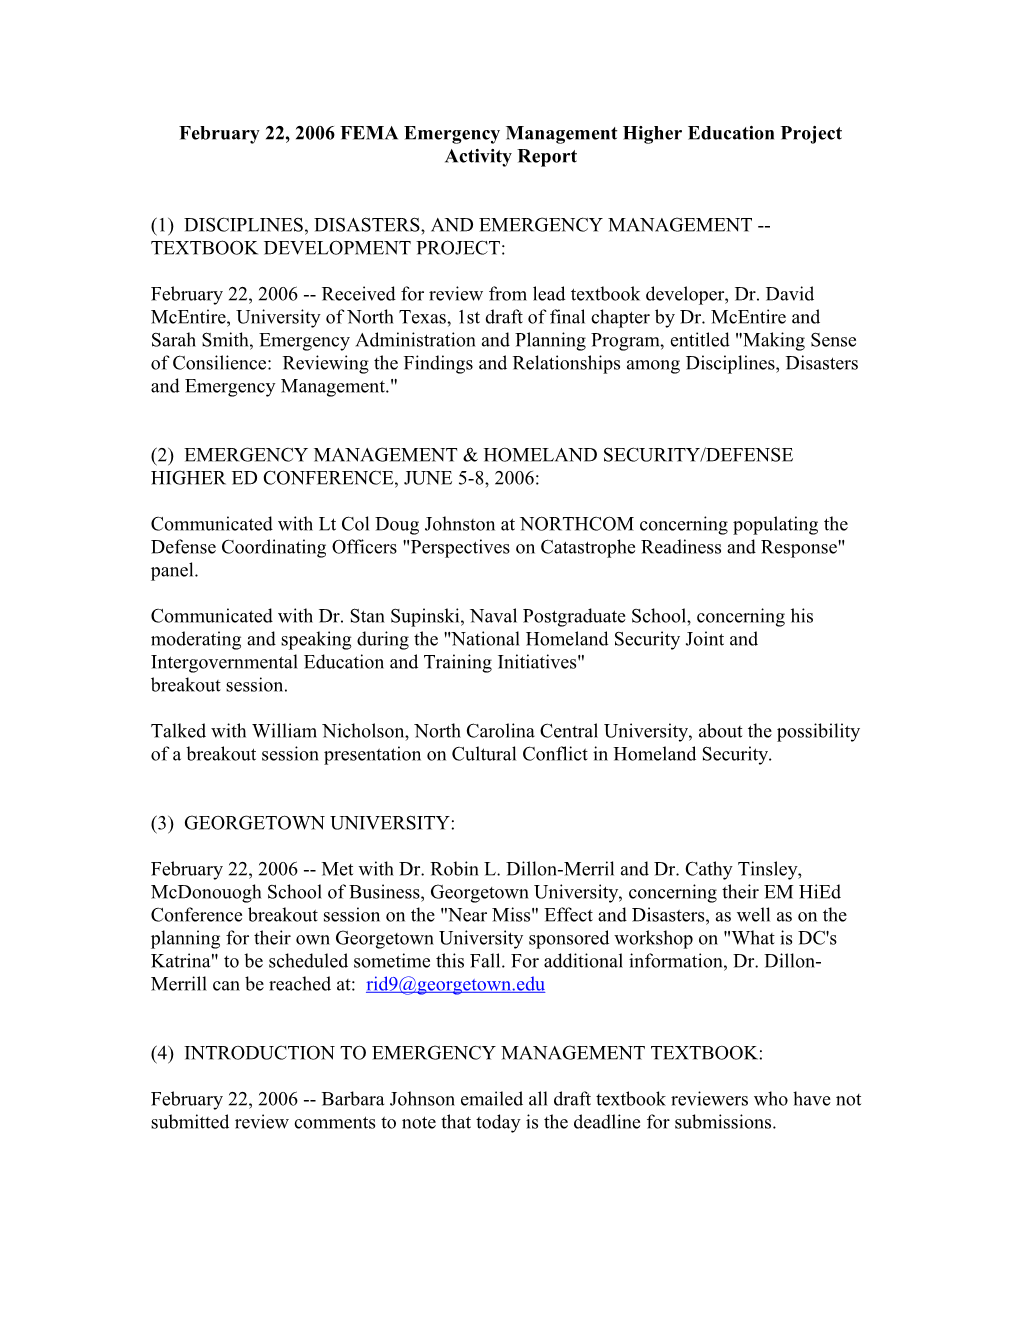 February 22, 2006 FEMA Emergency Management Higher Education Project Activity Report